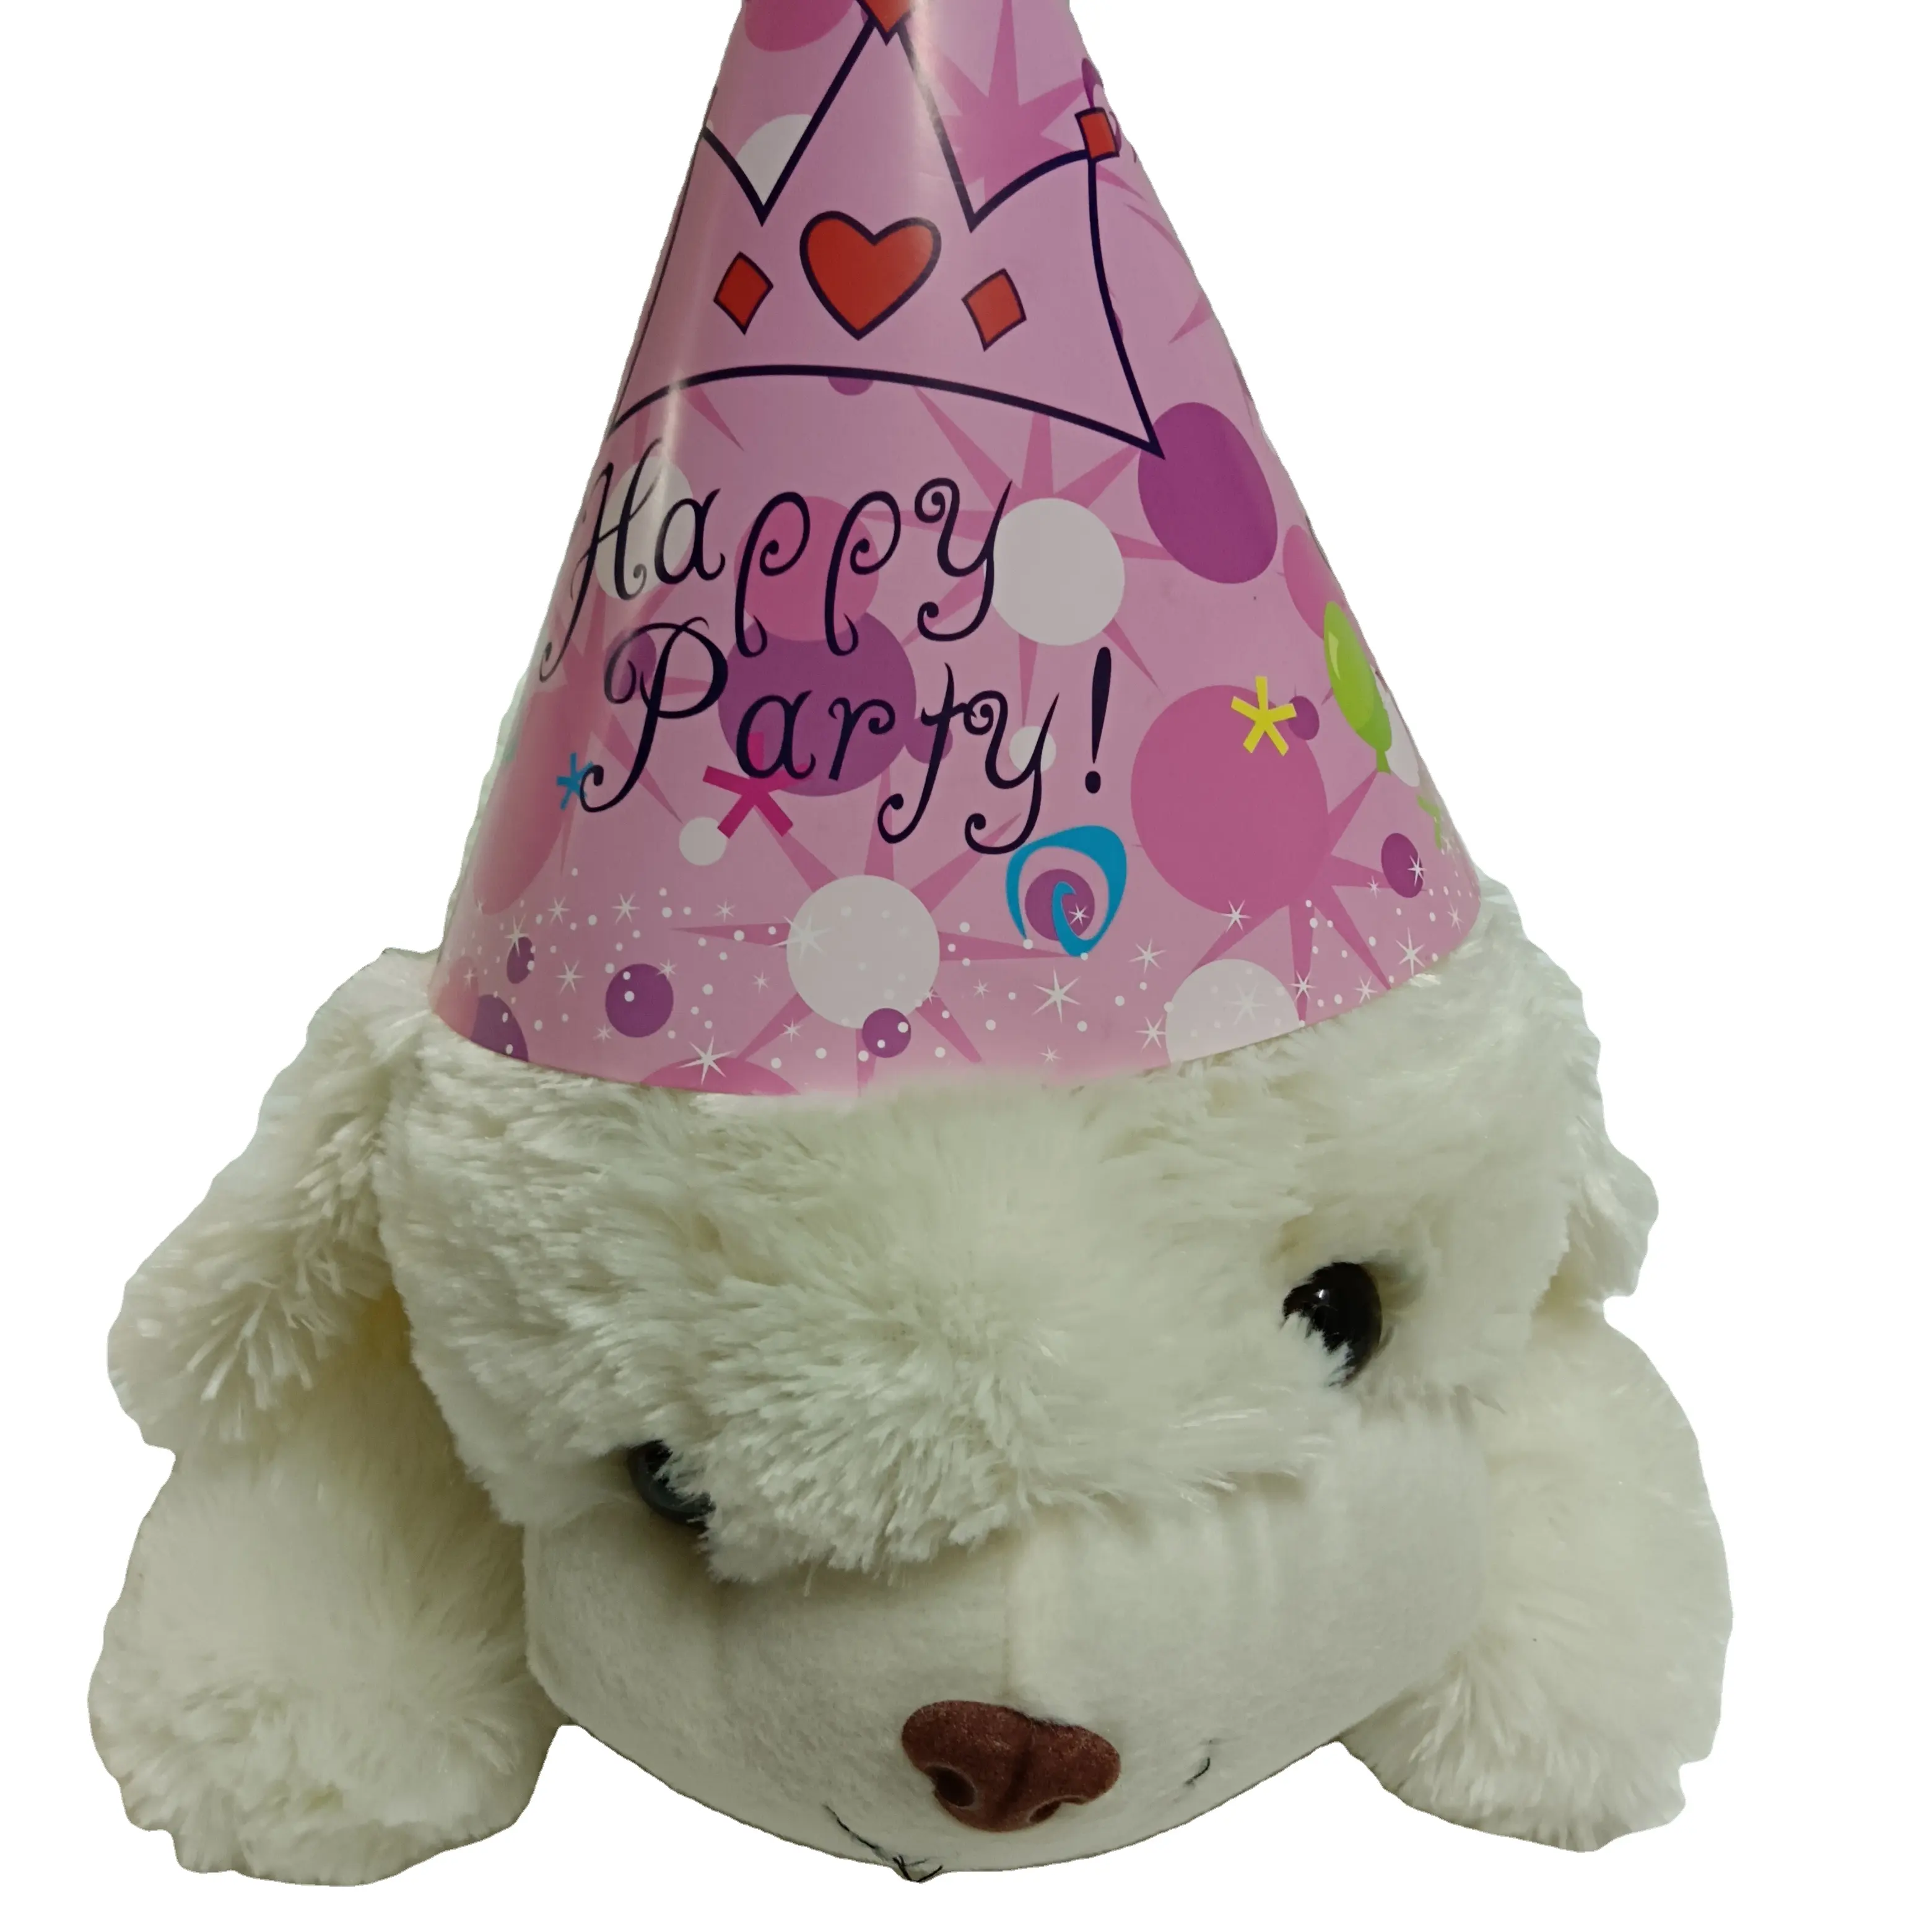 Kids Birthday Party Supplies SP326 Happy Birthday Party Paper Decorations Kids Hats Child Gifts Supplies Birthday Paper Hats